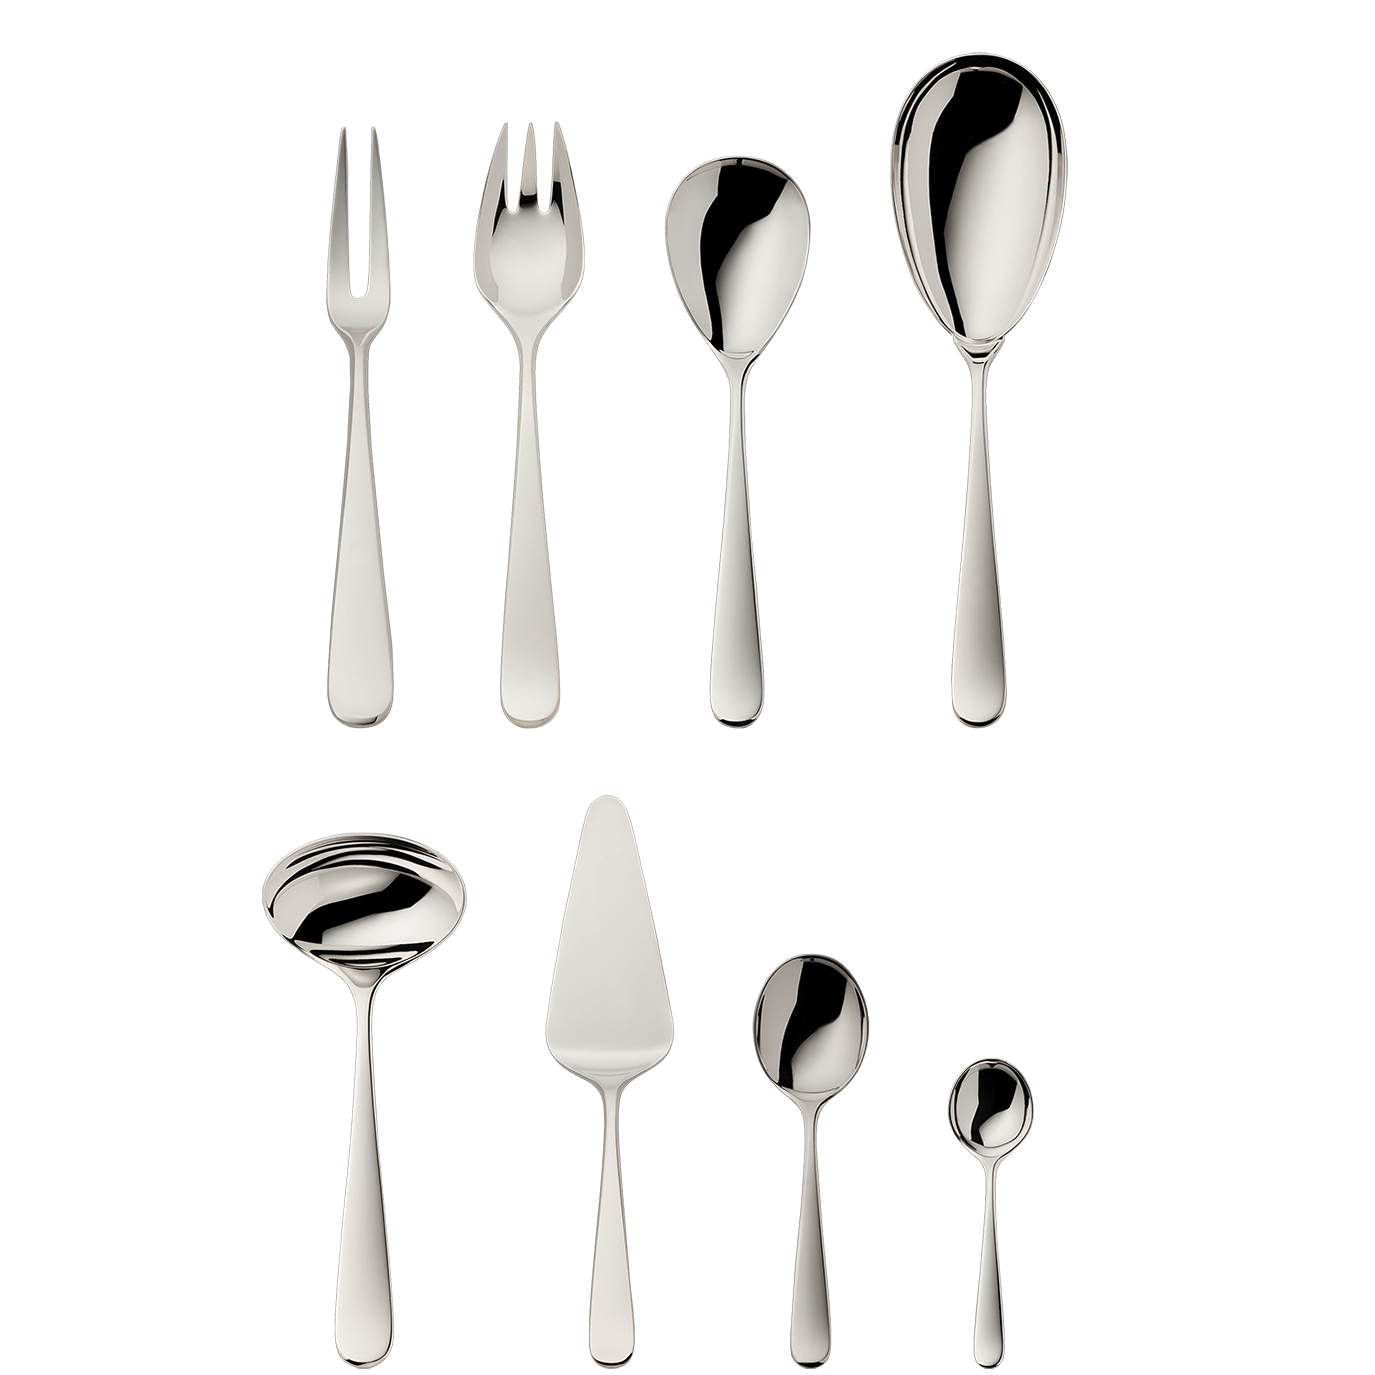 9 Tips on Cleaning and Caring for Silverplate Flatware or